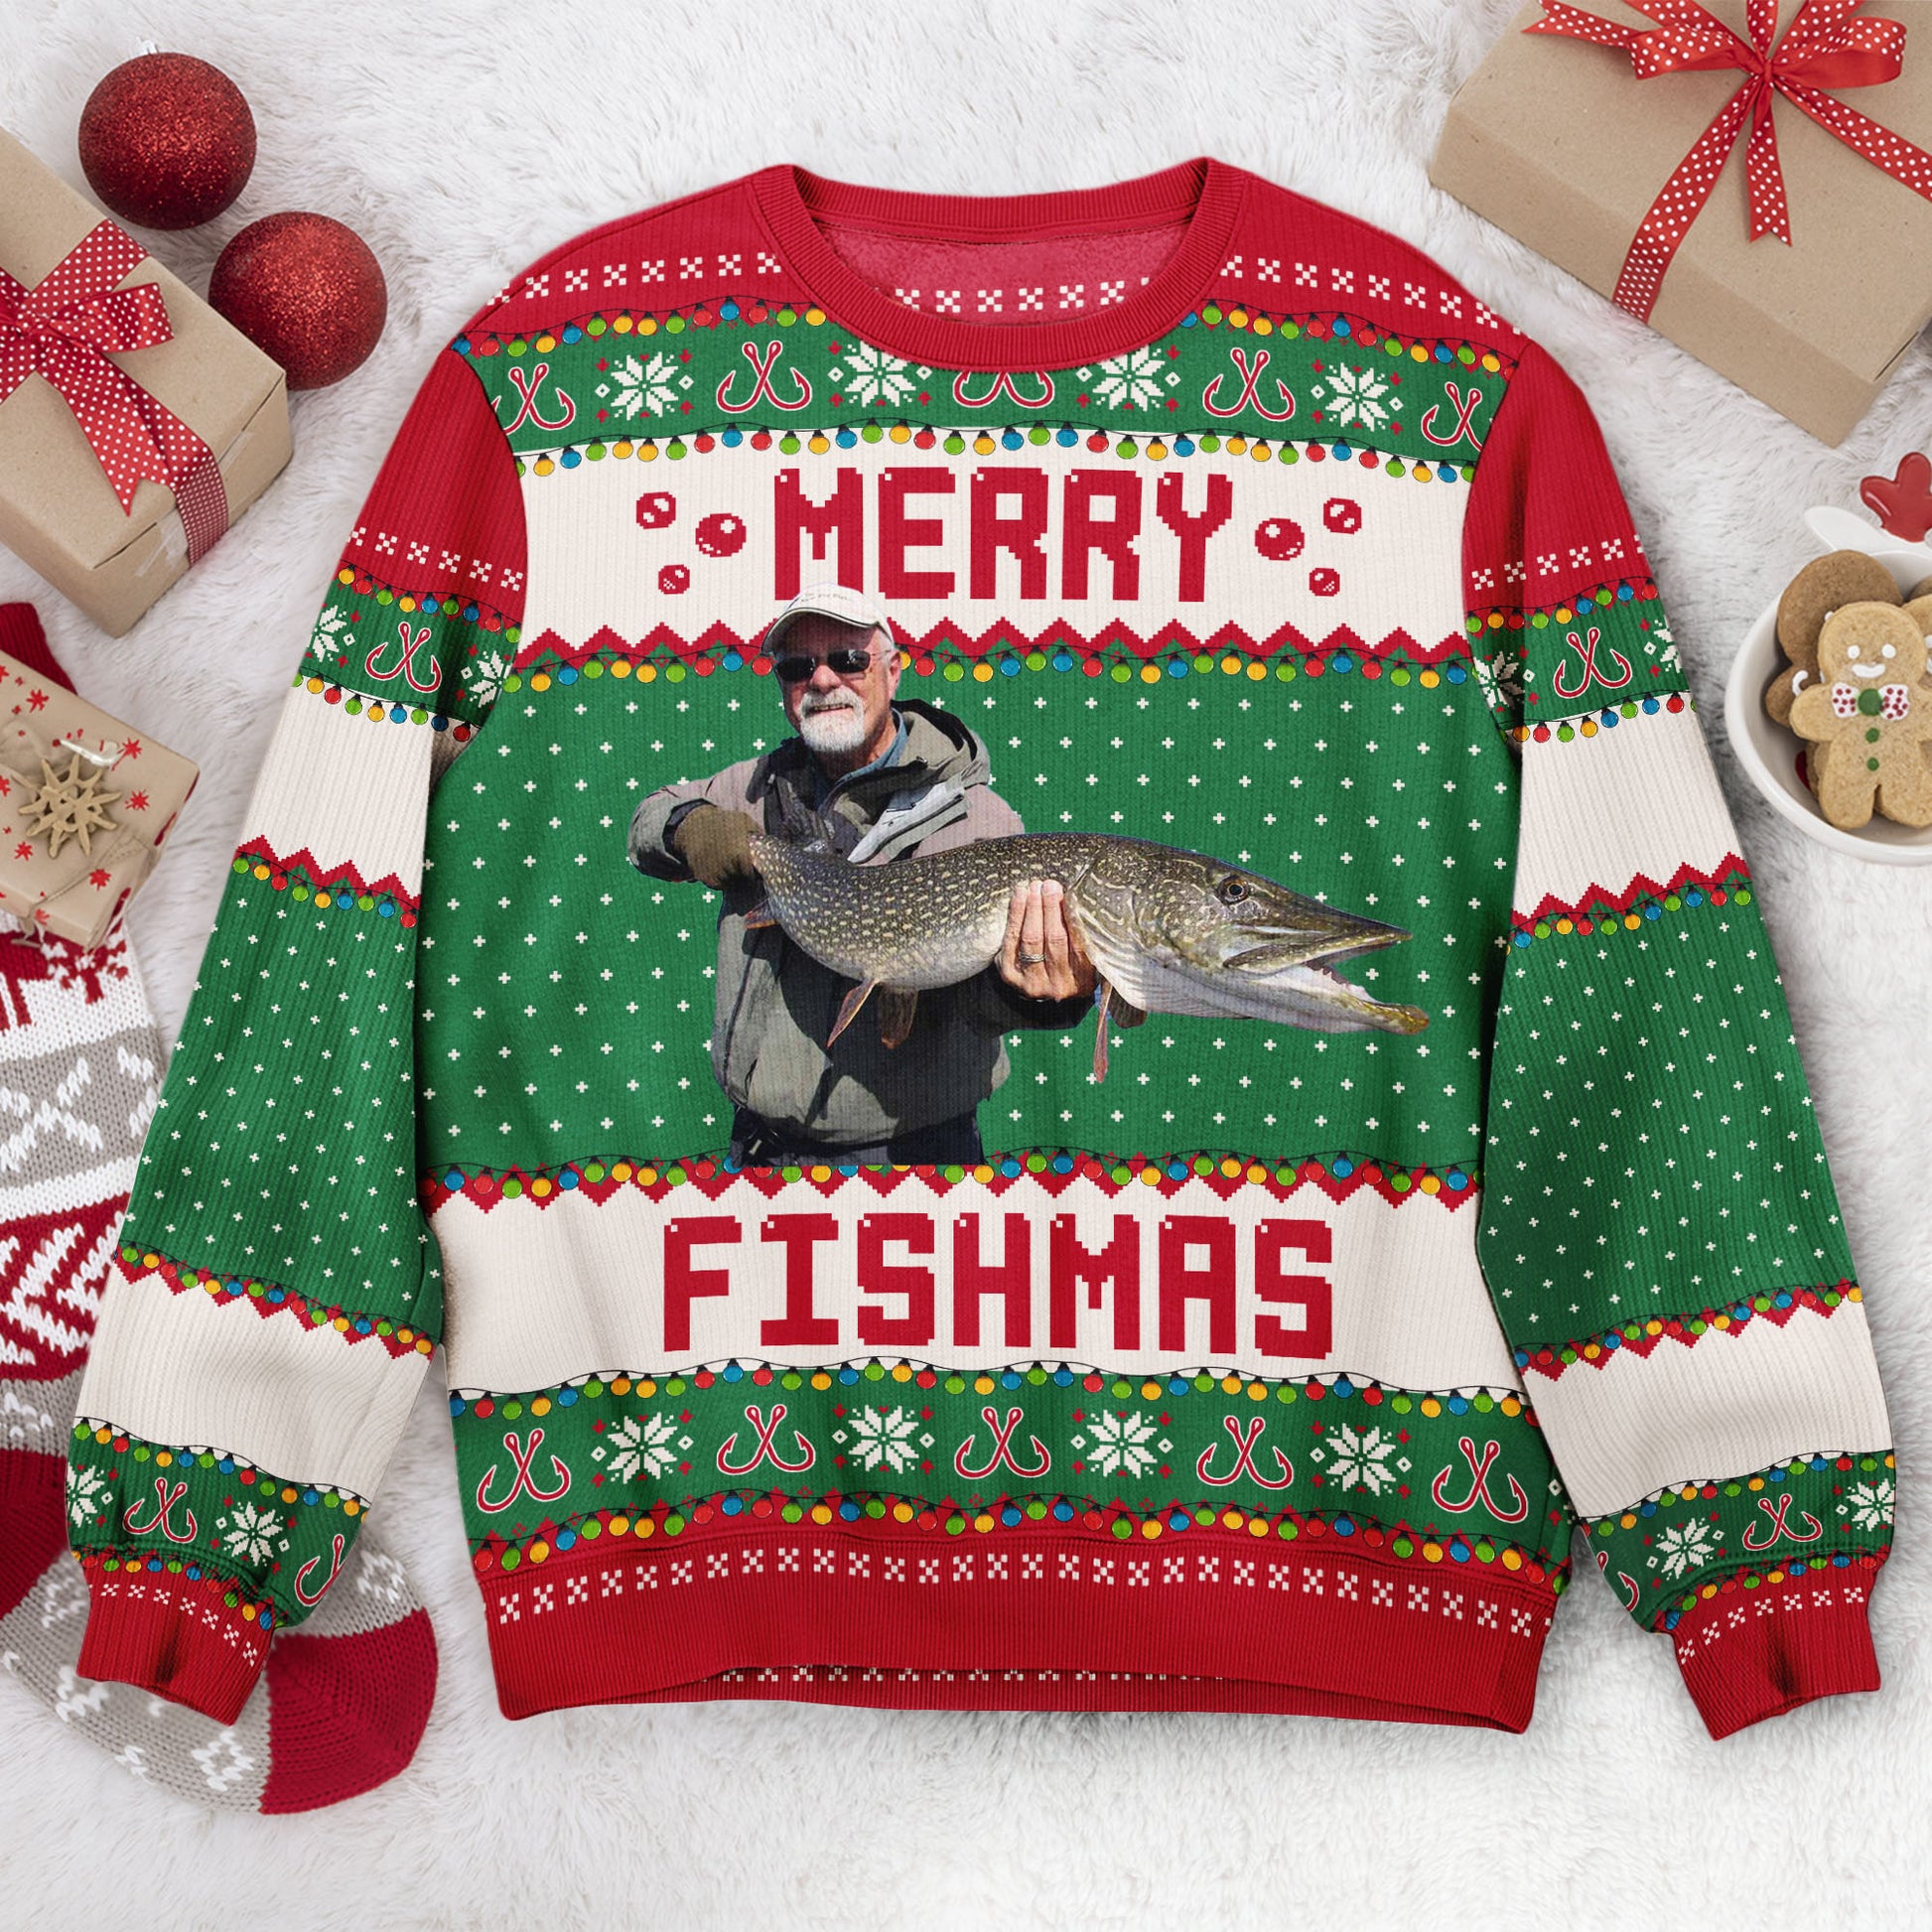 Fisherman Ugly Sweater Merry Fishmas T-shirt Ugly Sweater Funny